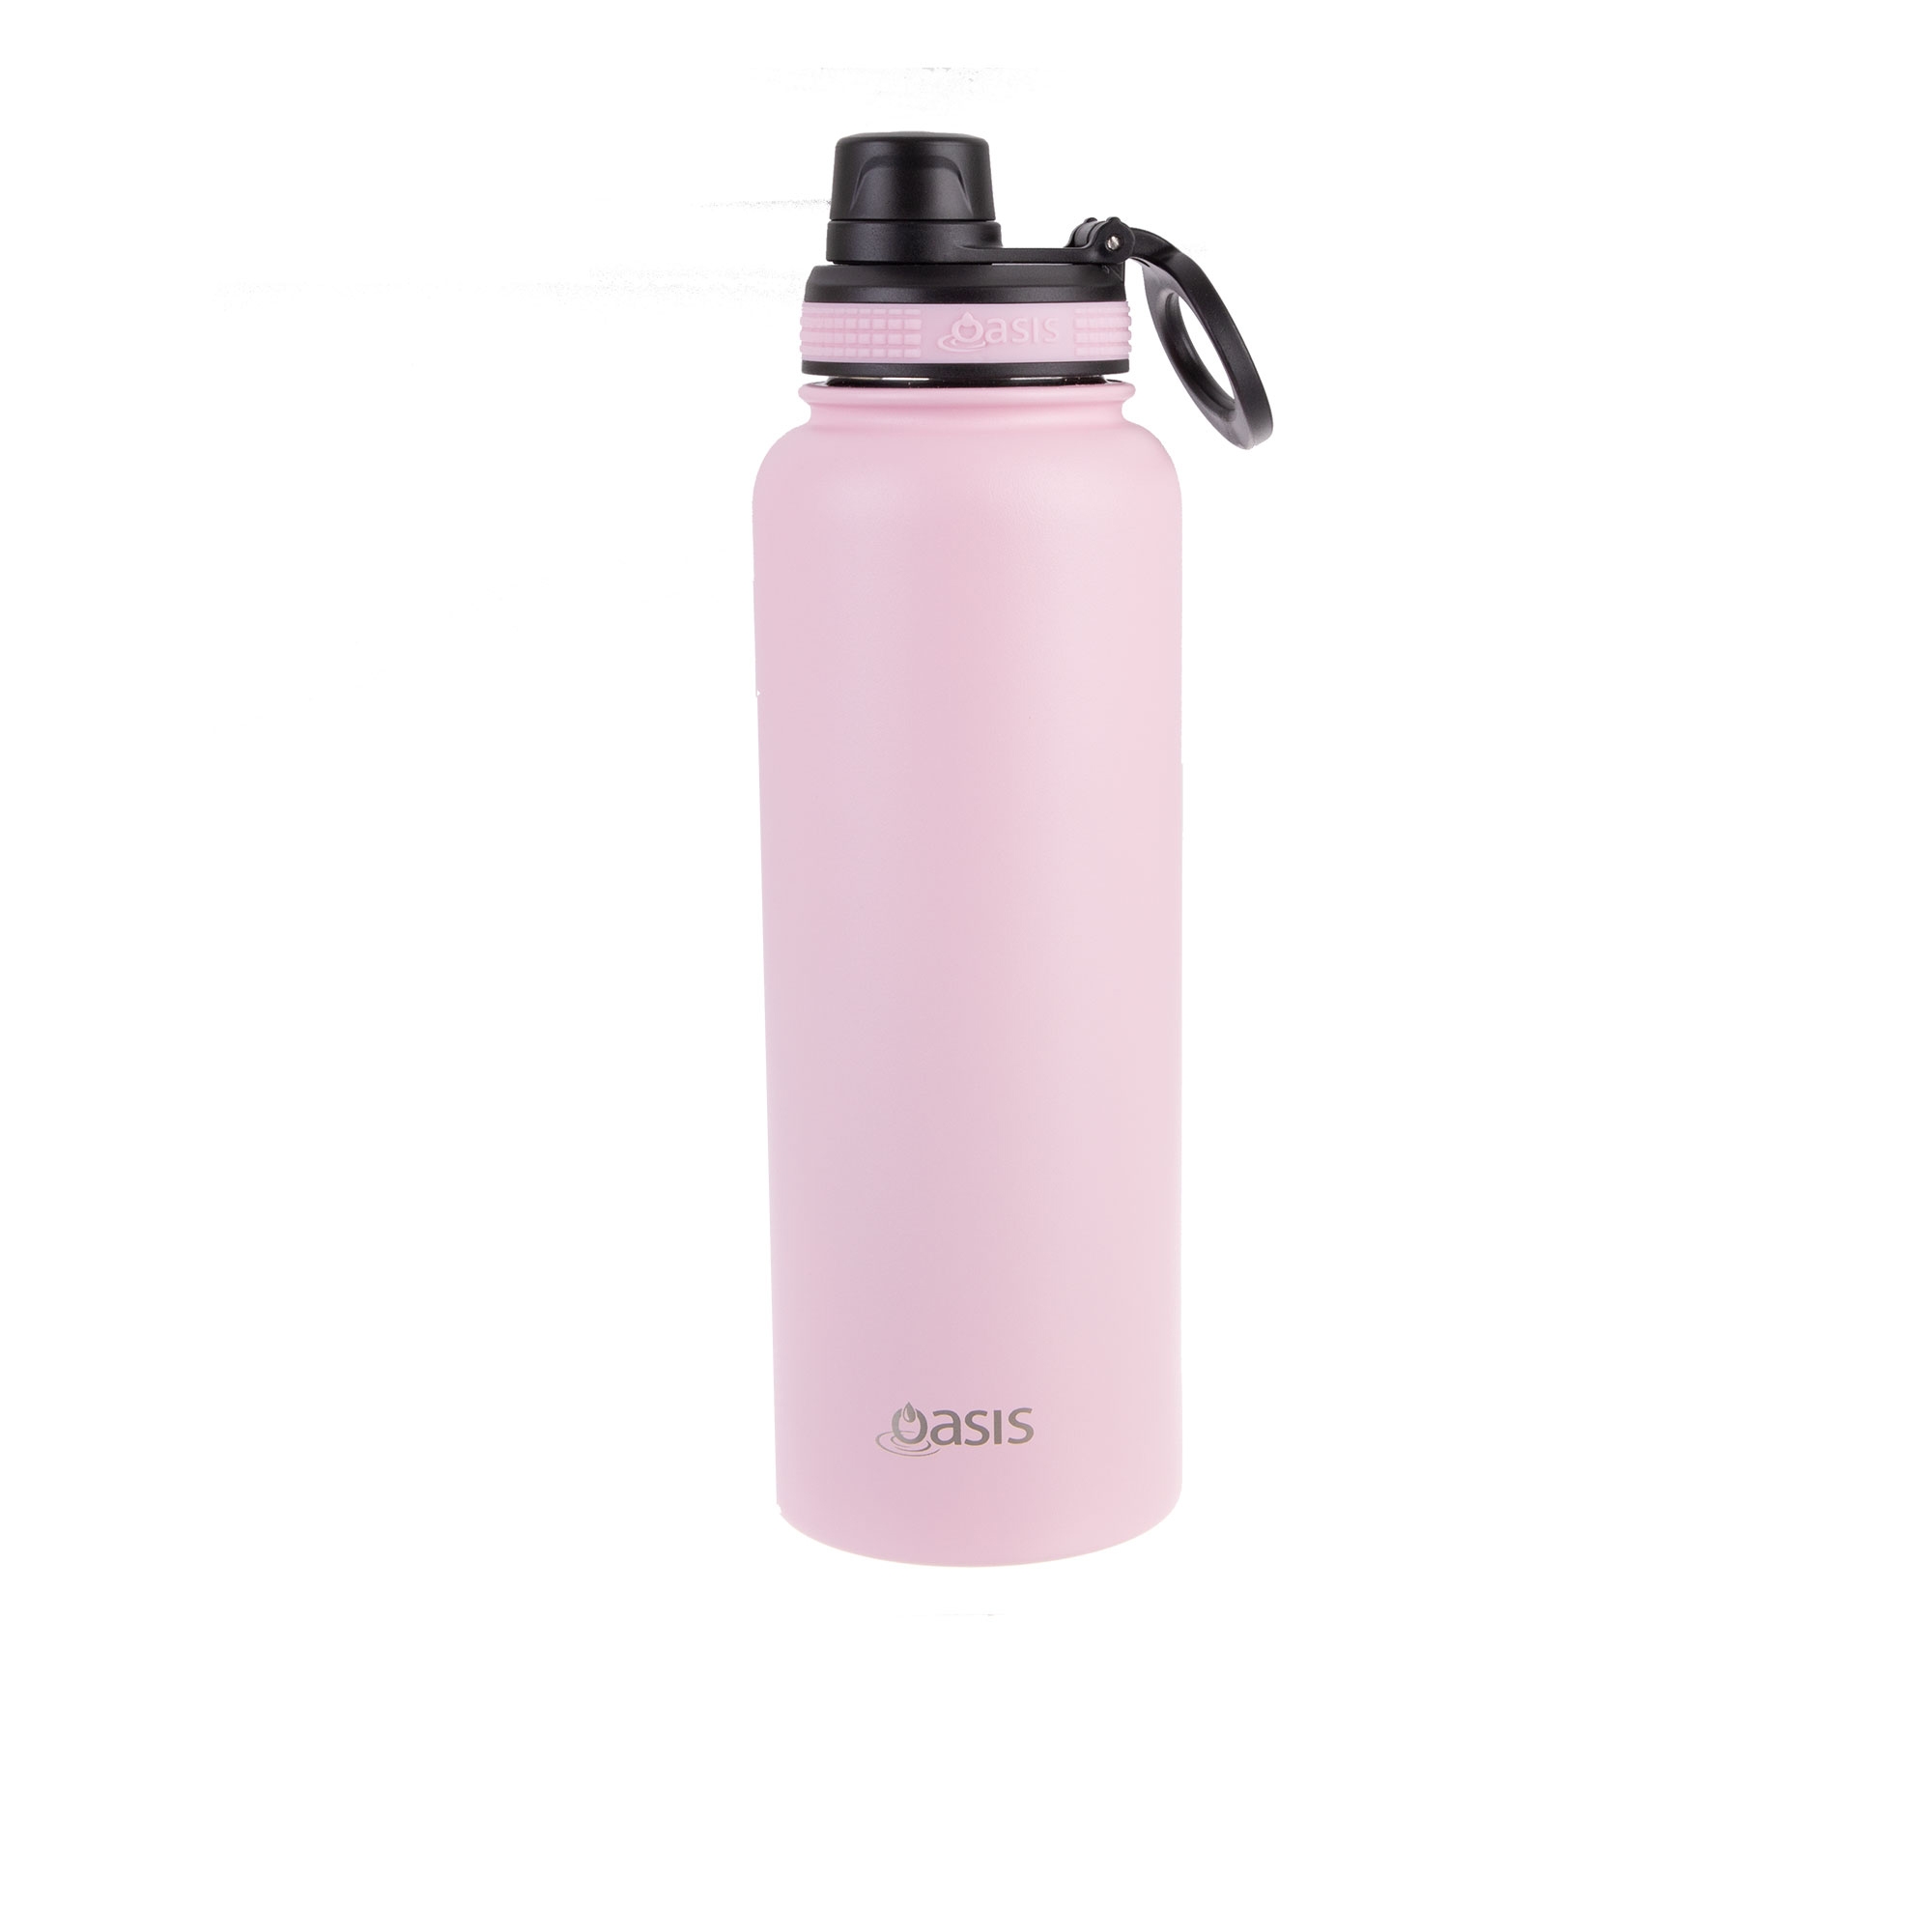 Oasis Challenger Double Wall Insulated Sports Bottle 1.1L Carnation Image 1